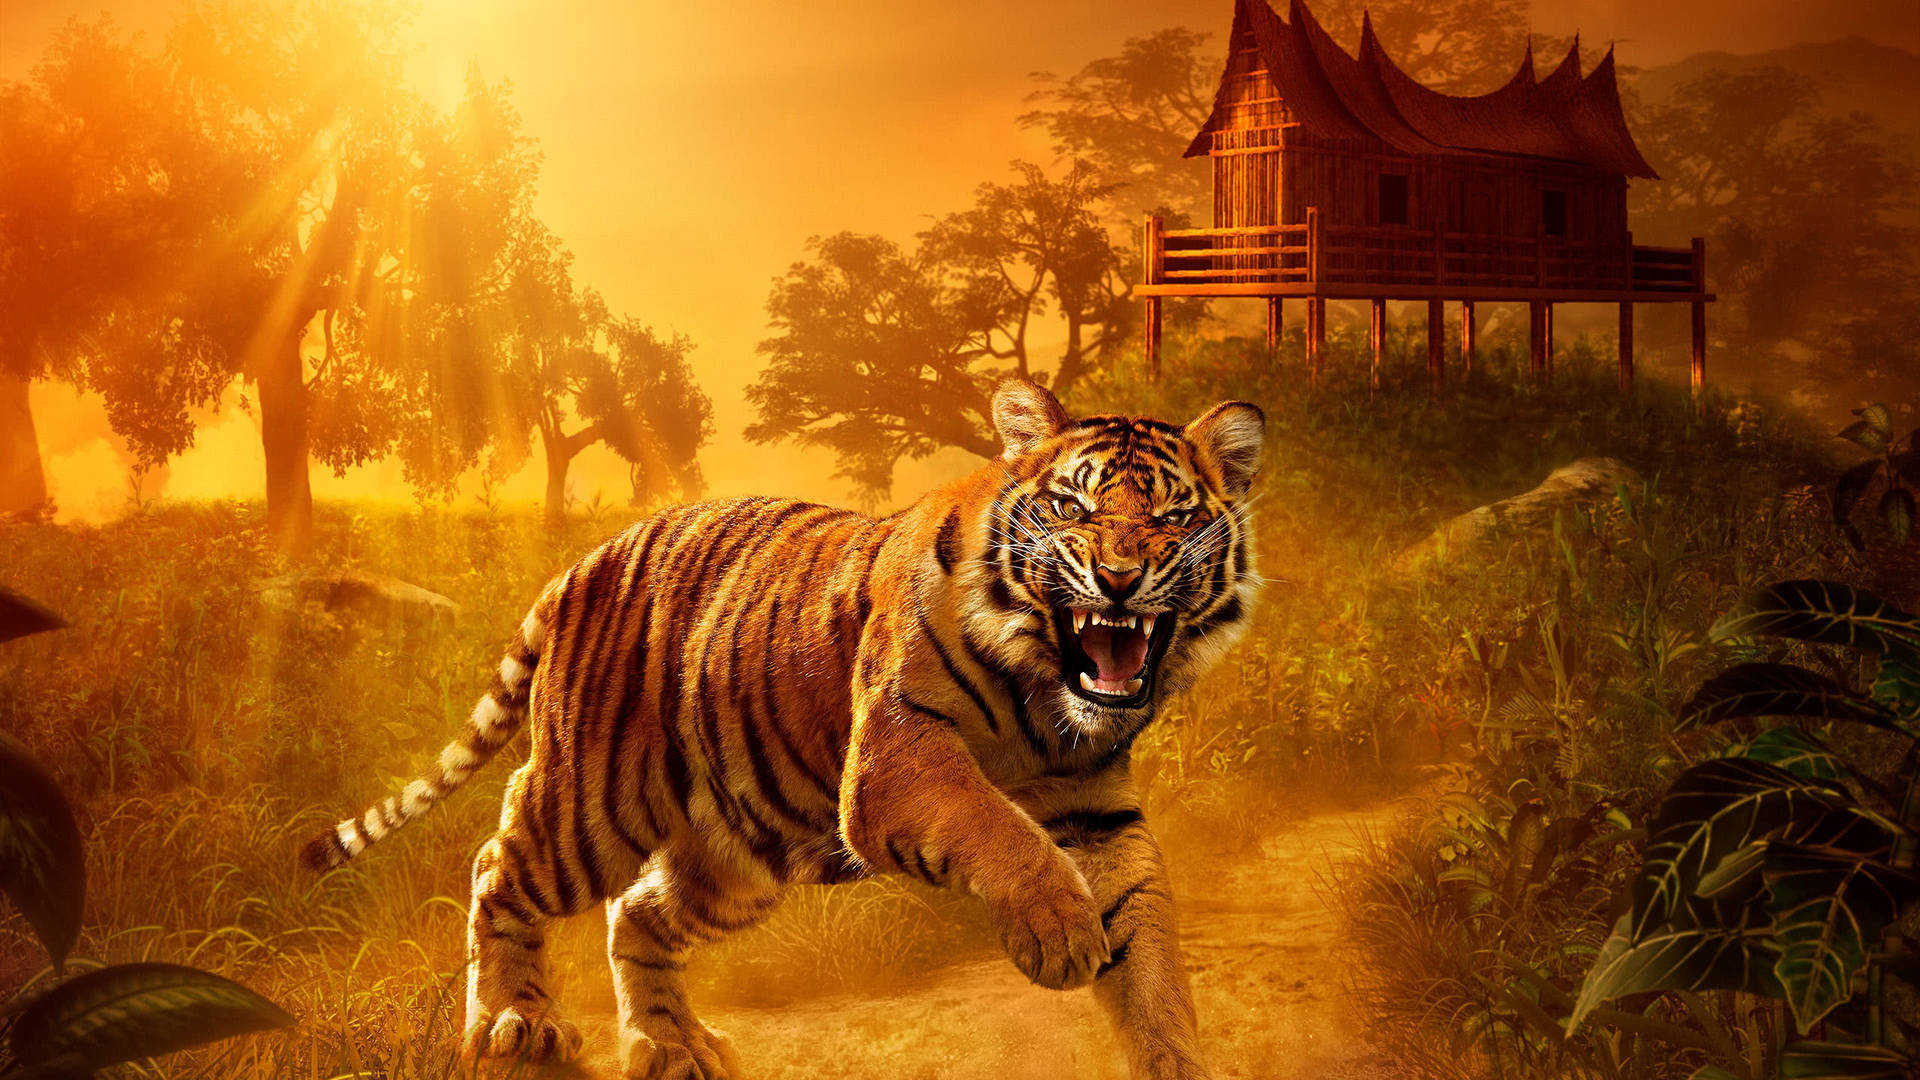 1440p Hd Tiger In Forest Orange Aesthetic Wallpaper